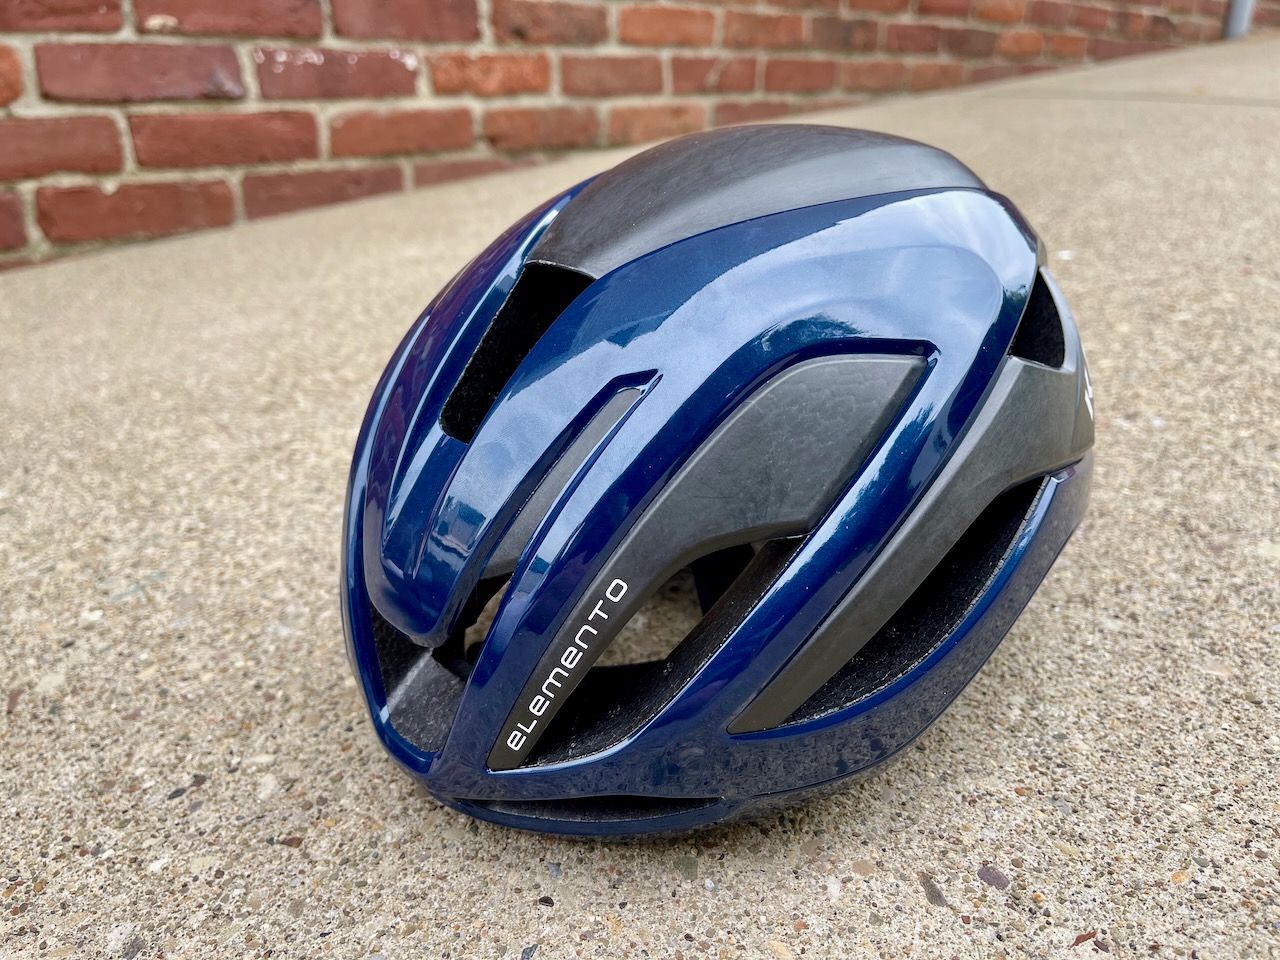 All-New Elemento Aero Helmet Be The For All Disciplines -